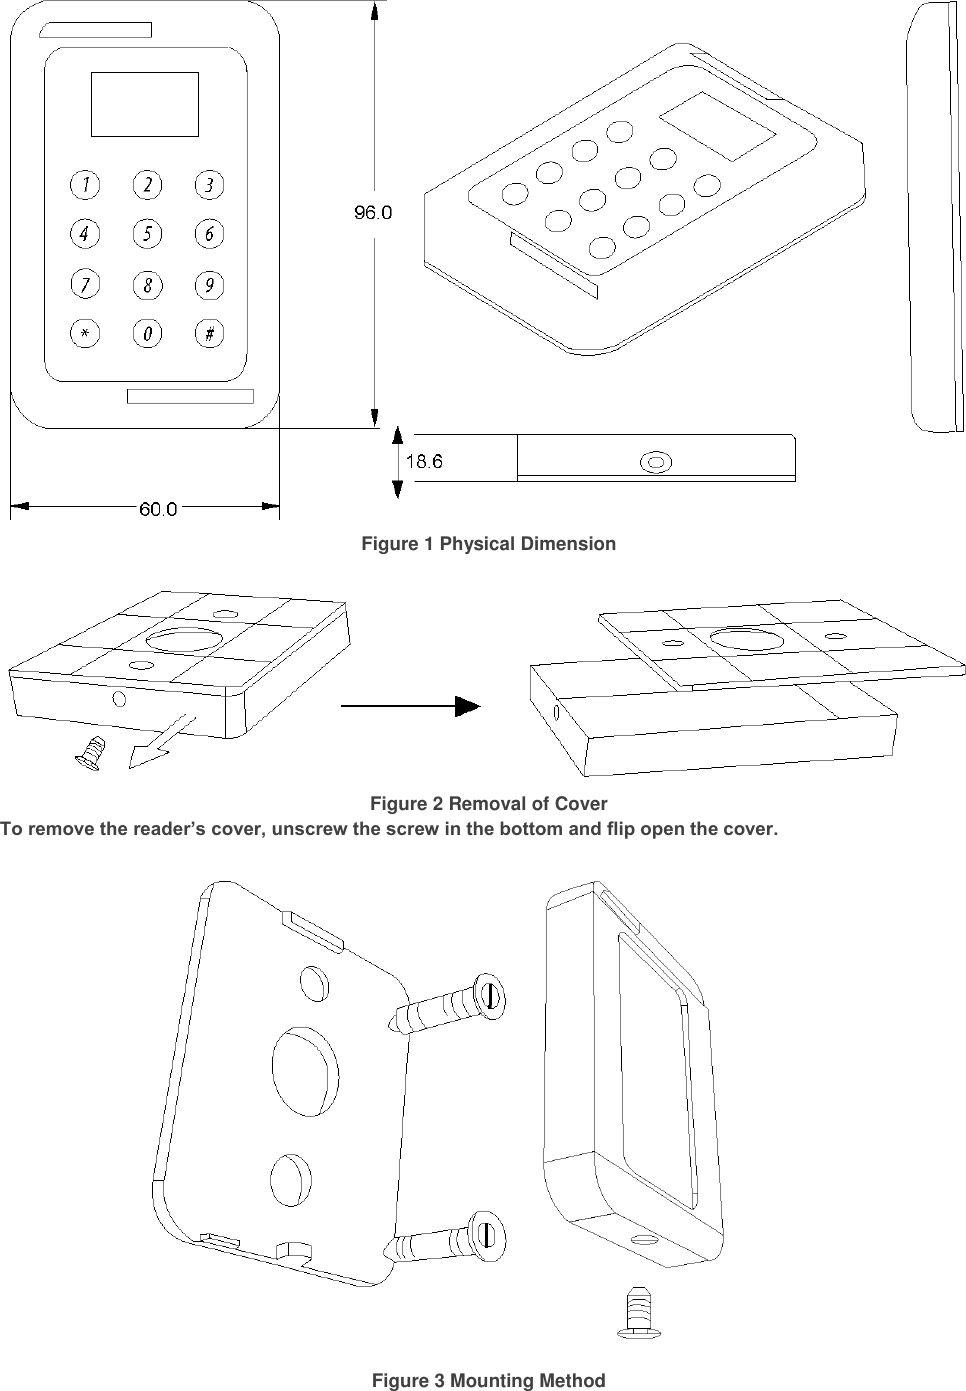   Figure 1 Physical Dimension   Figure 2 Removal of Cover To remove the reader’s cover, unscrew the screw in the bottom and flip open the cover.    Figure 3 Mounting Method 